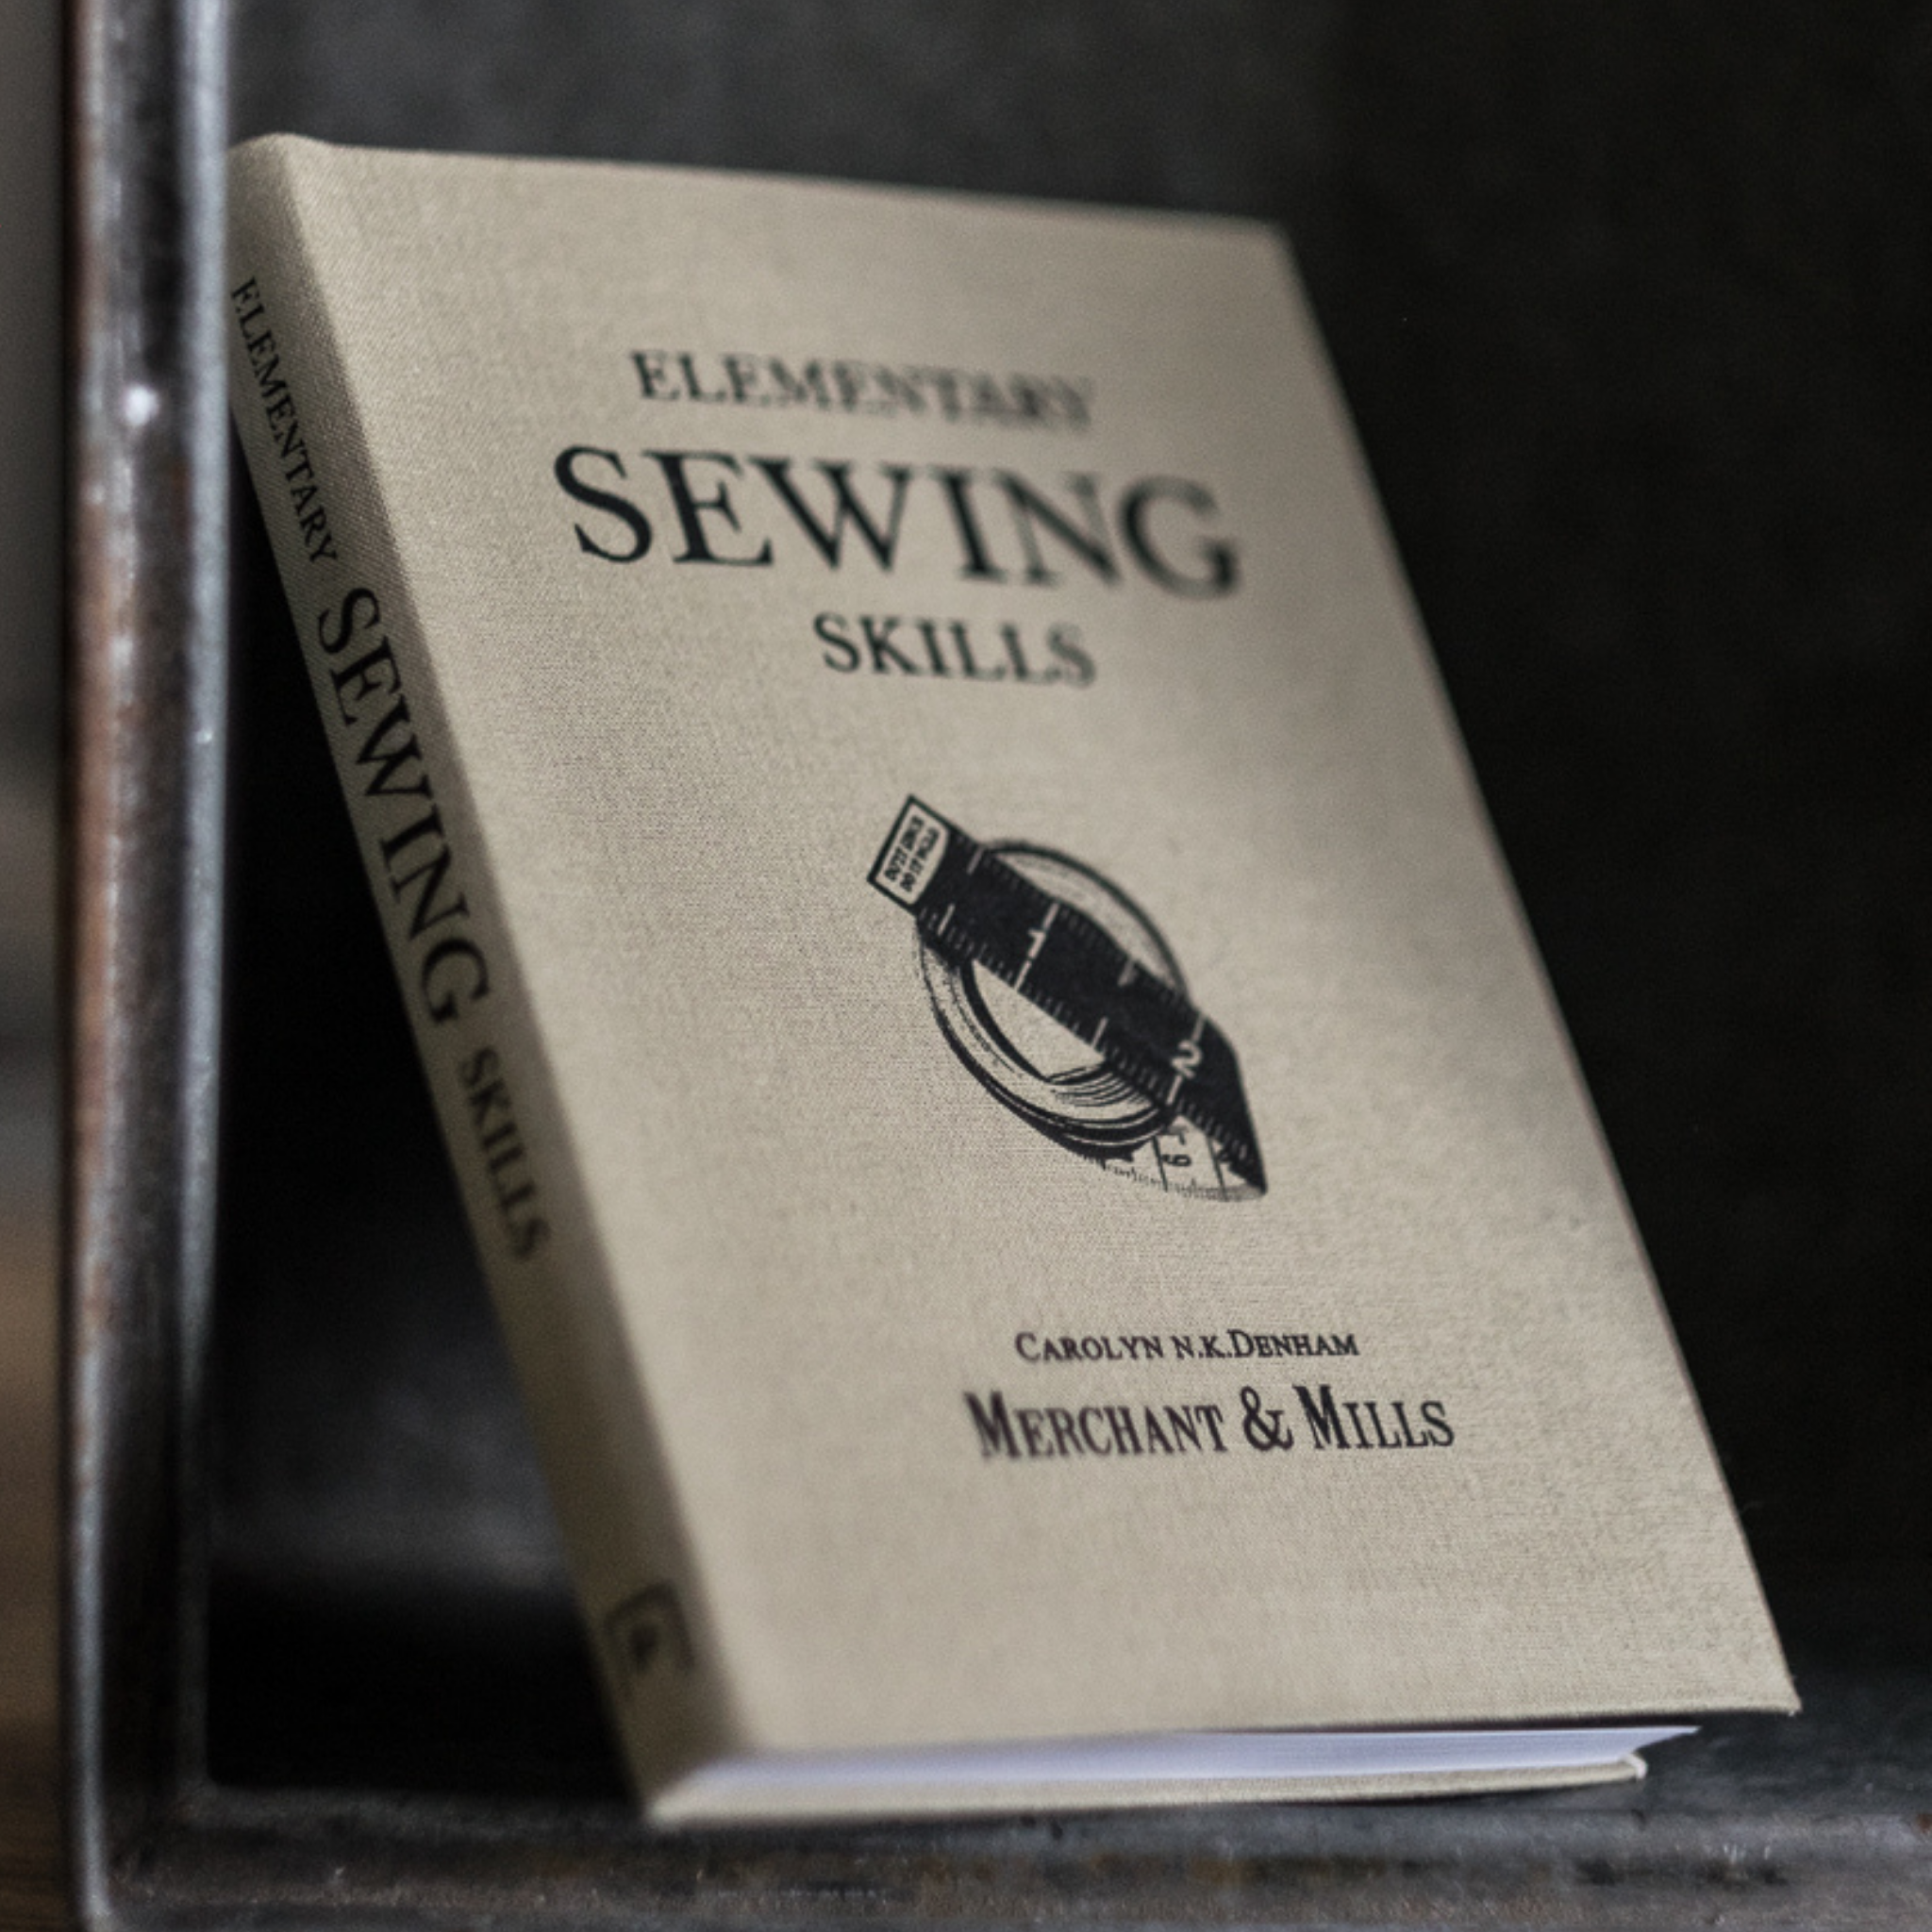 Bugs and Fishes by Lupin: Book Review: Merchant and Mills Sewing Book